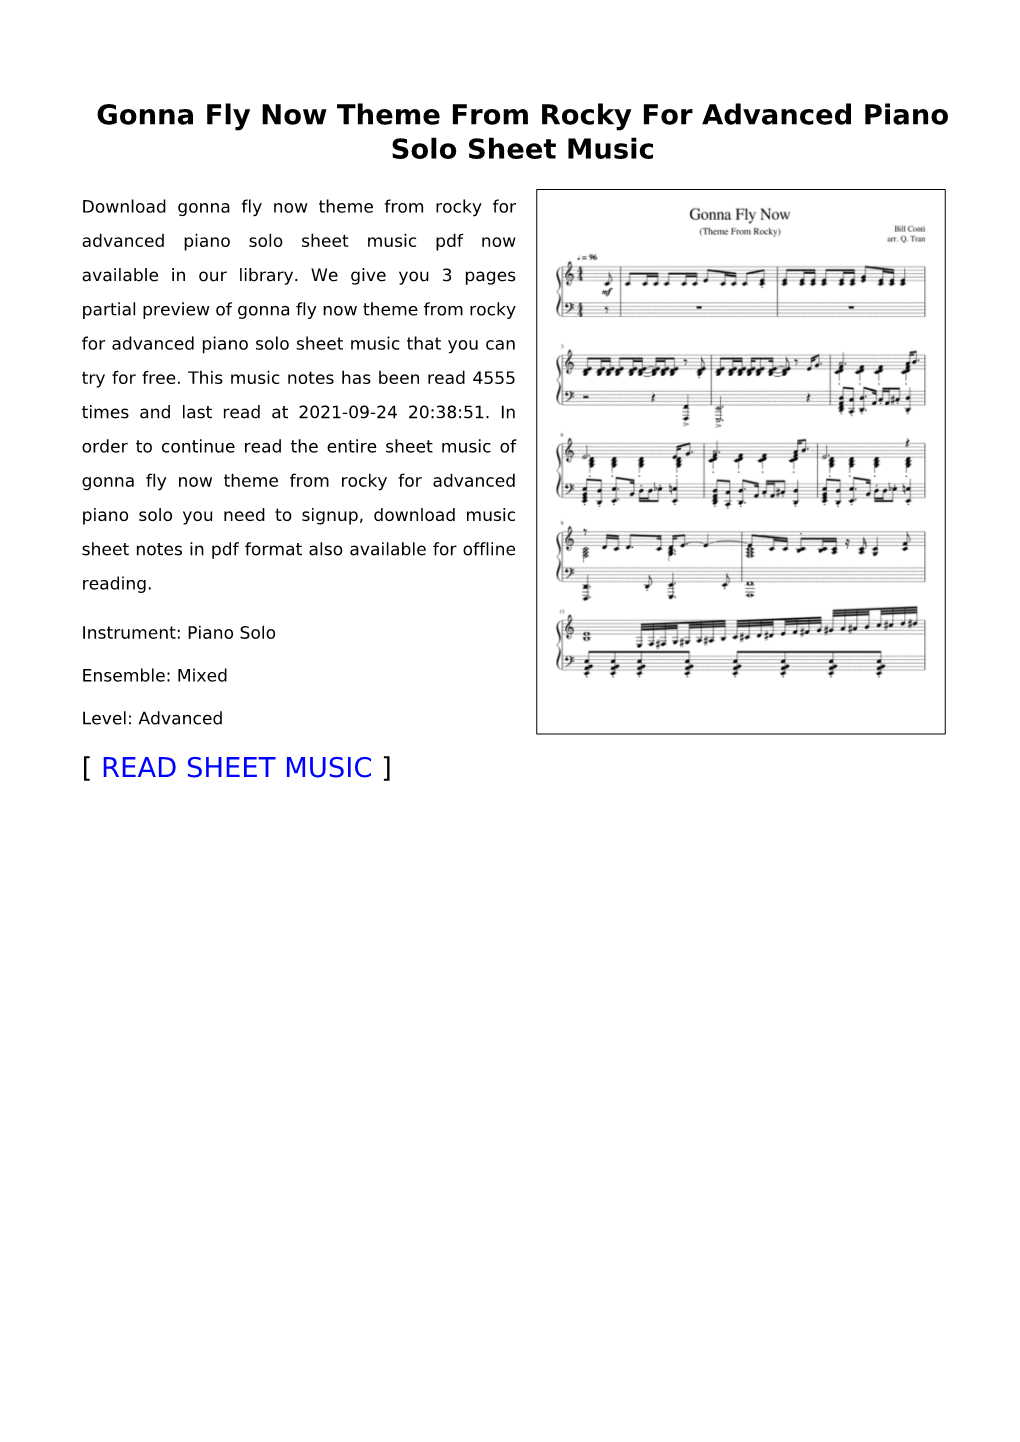 Gonna Fly Now Theme from Rocky for Advanced Piano Solo Sheet Music